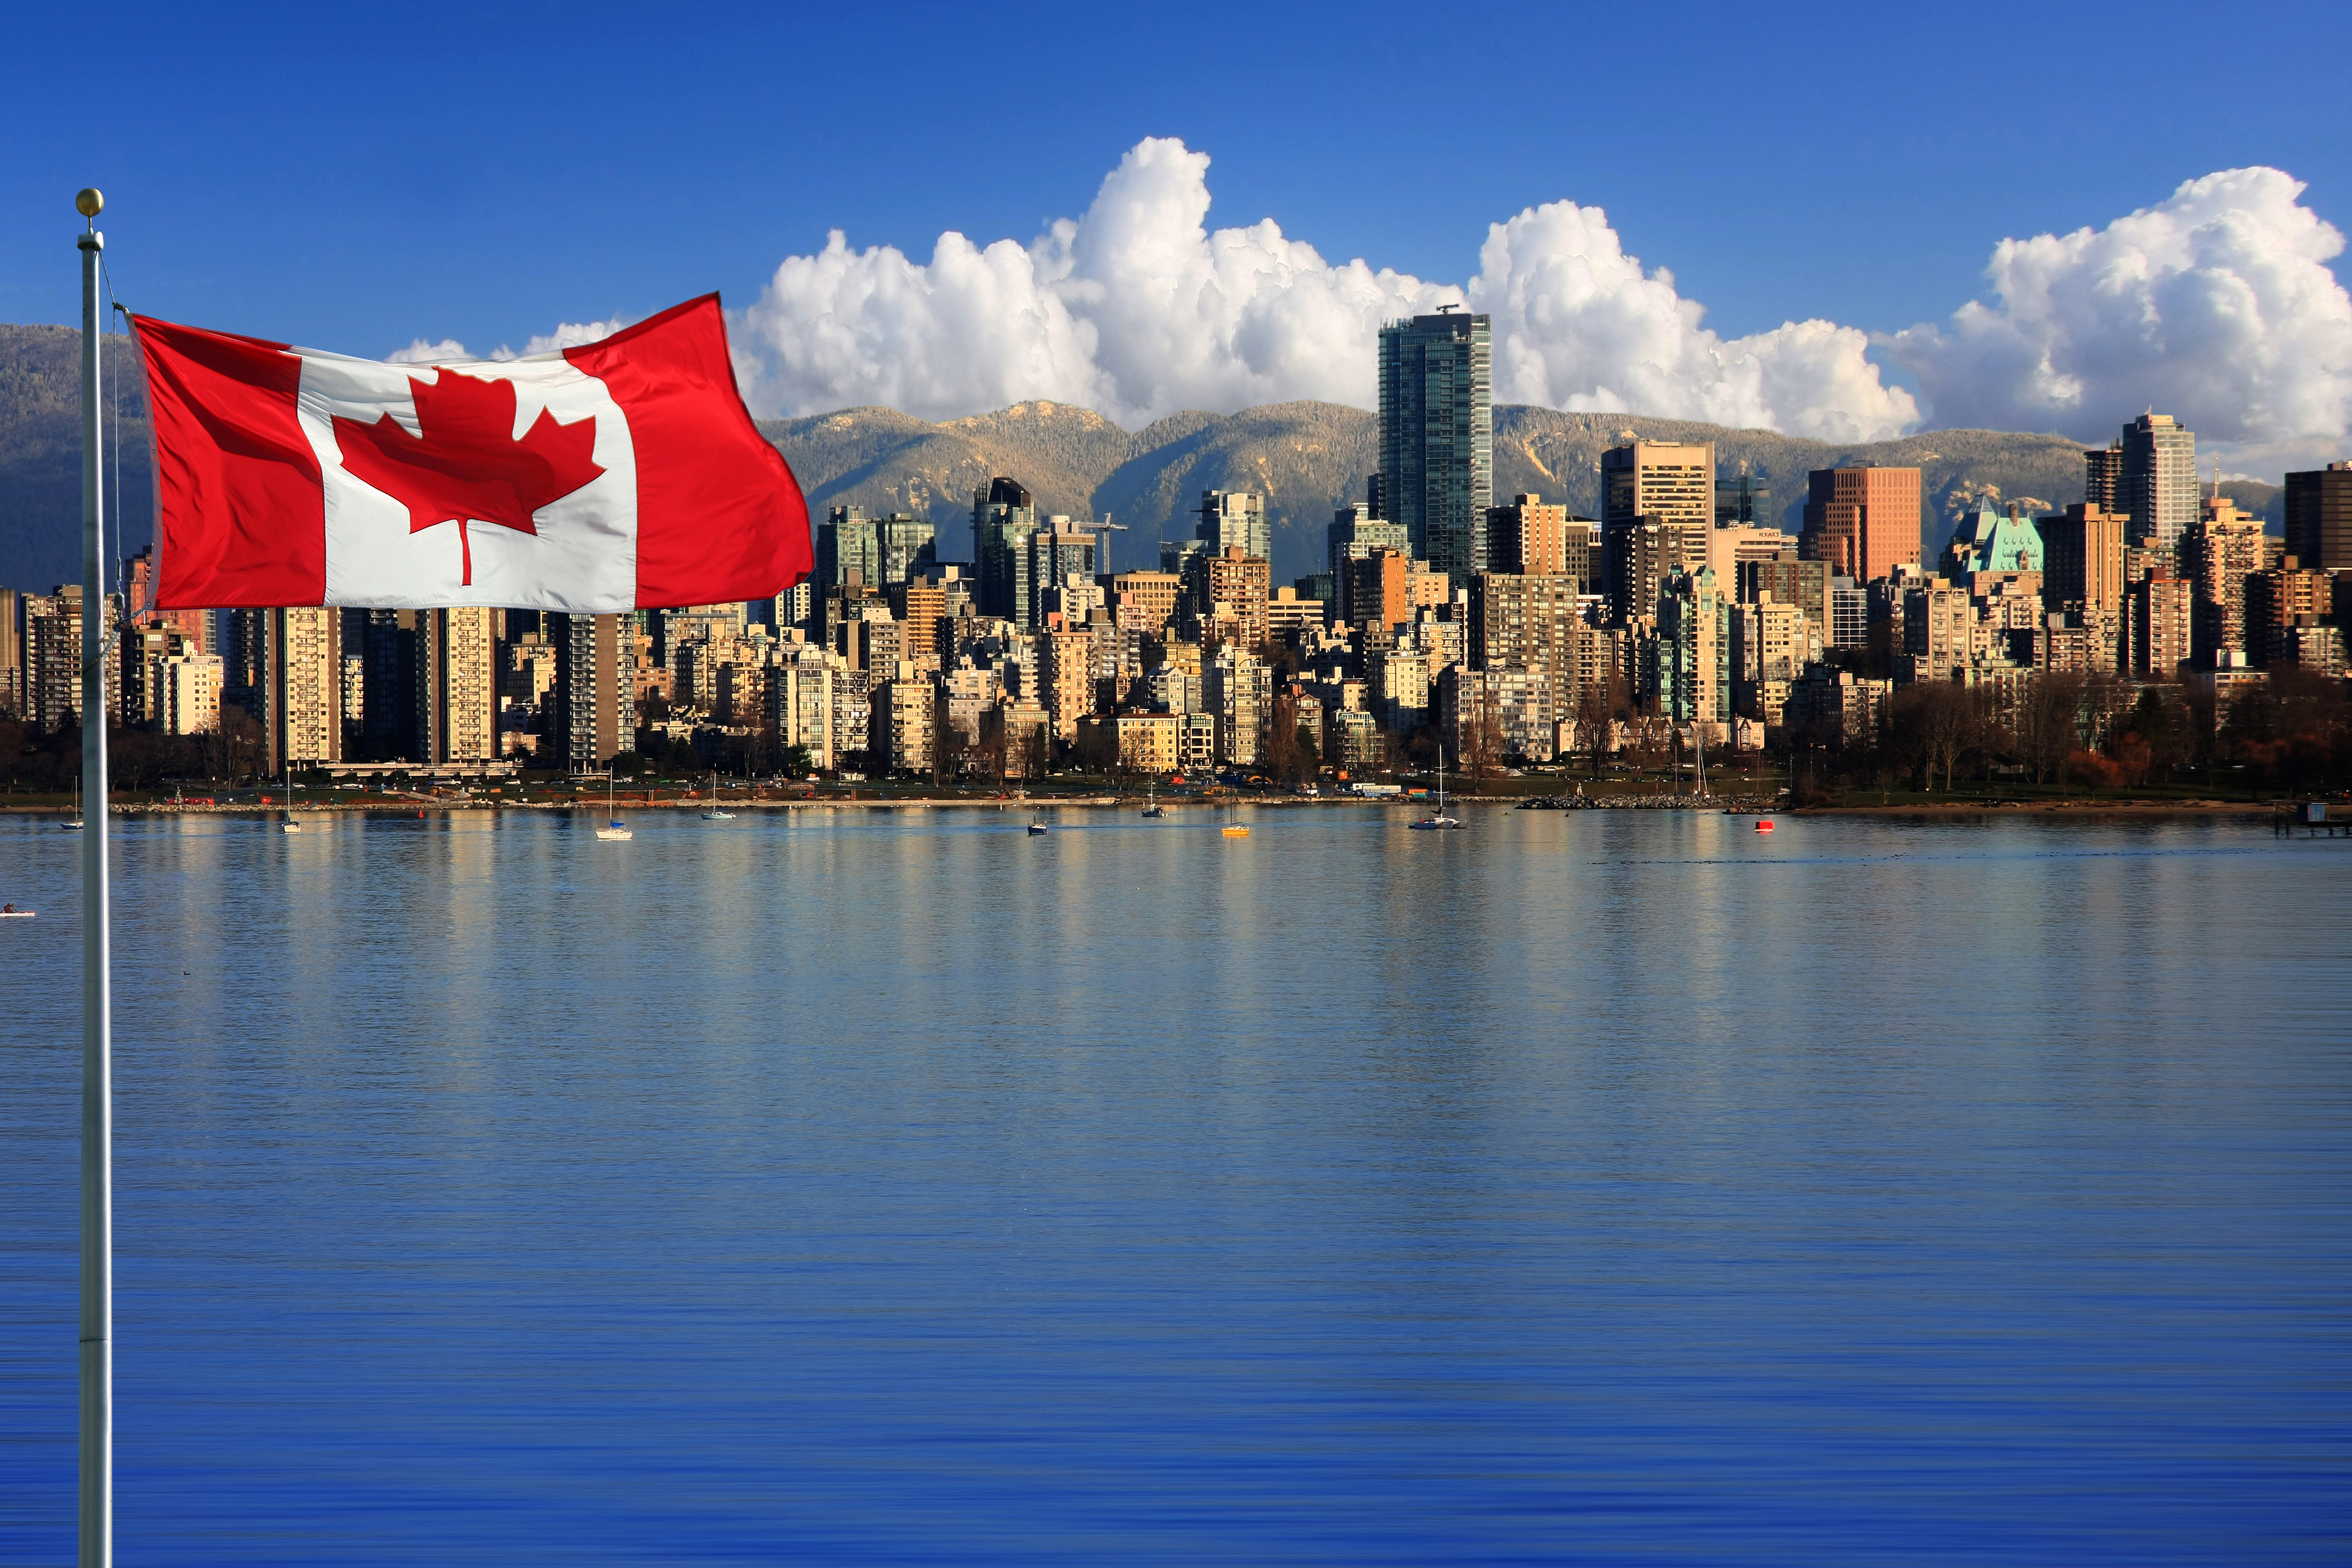 The Canadian flag on the background of the city symbolizes the citizenship of Canada